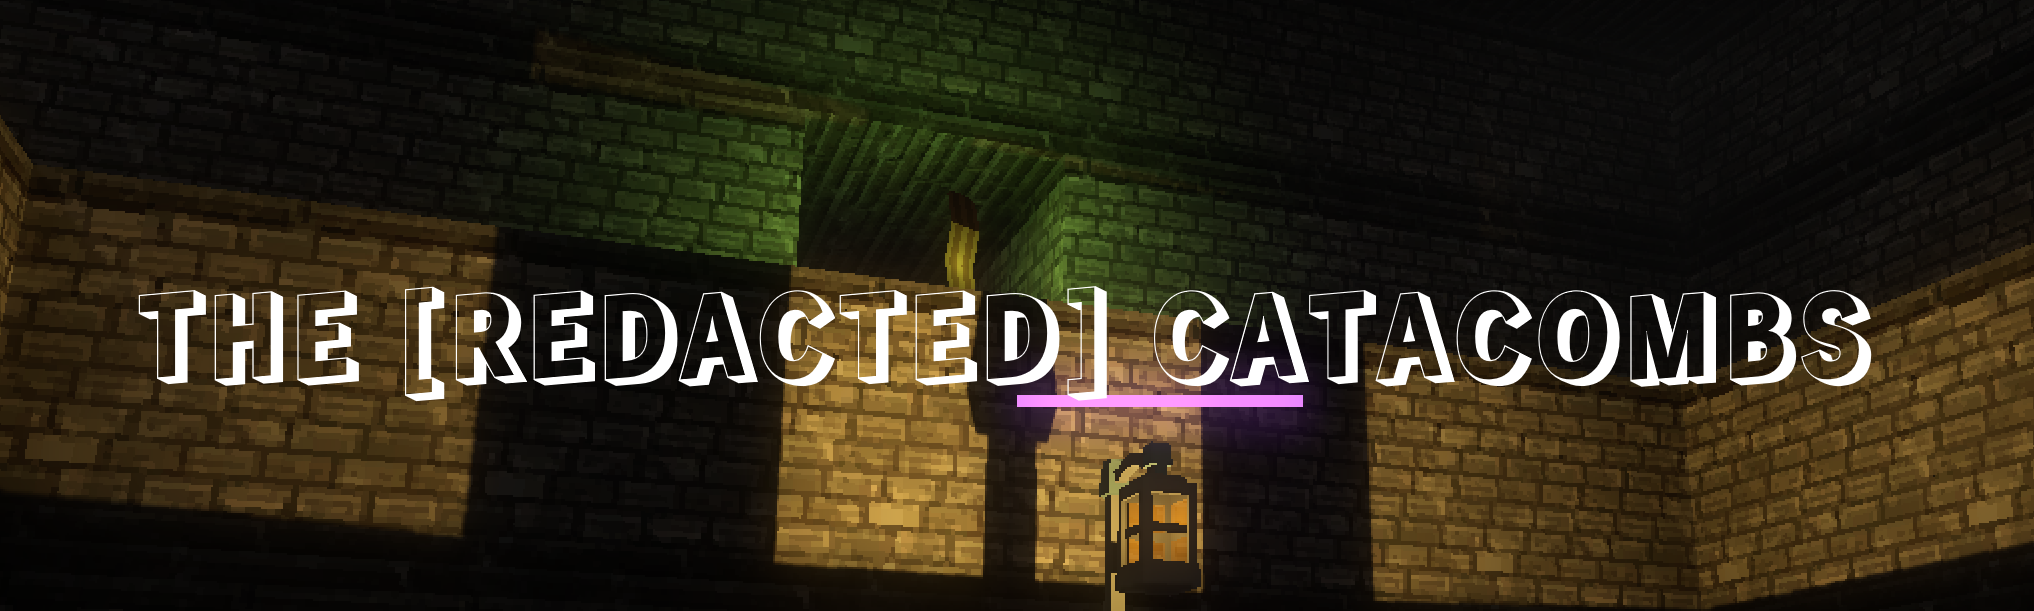 The [REDACTED] Catacombs